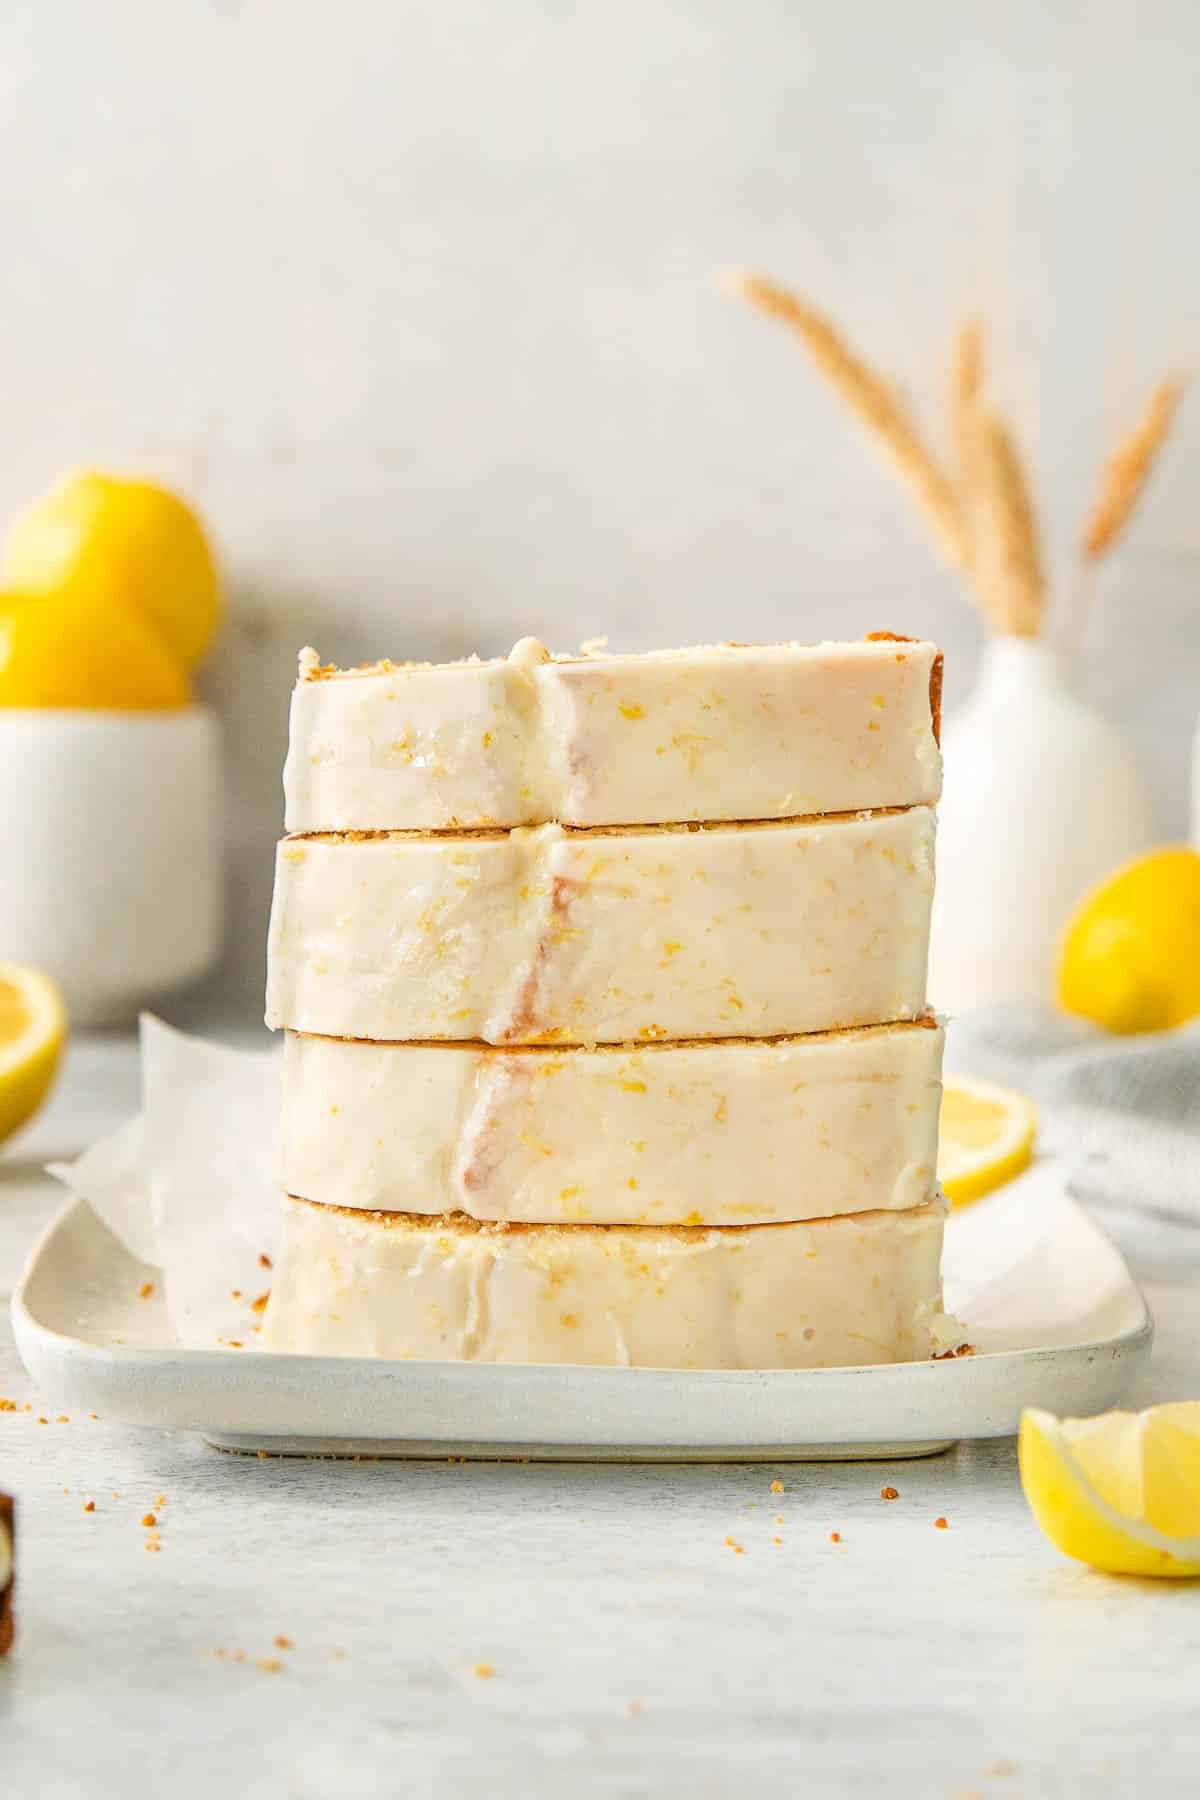 Stack of four slices of lemon pound cake on white plate.